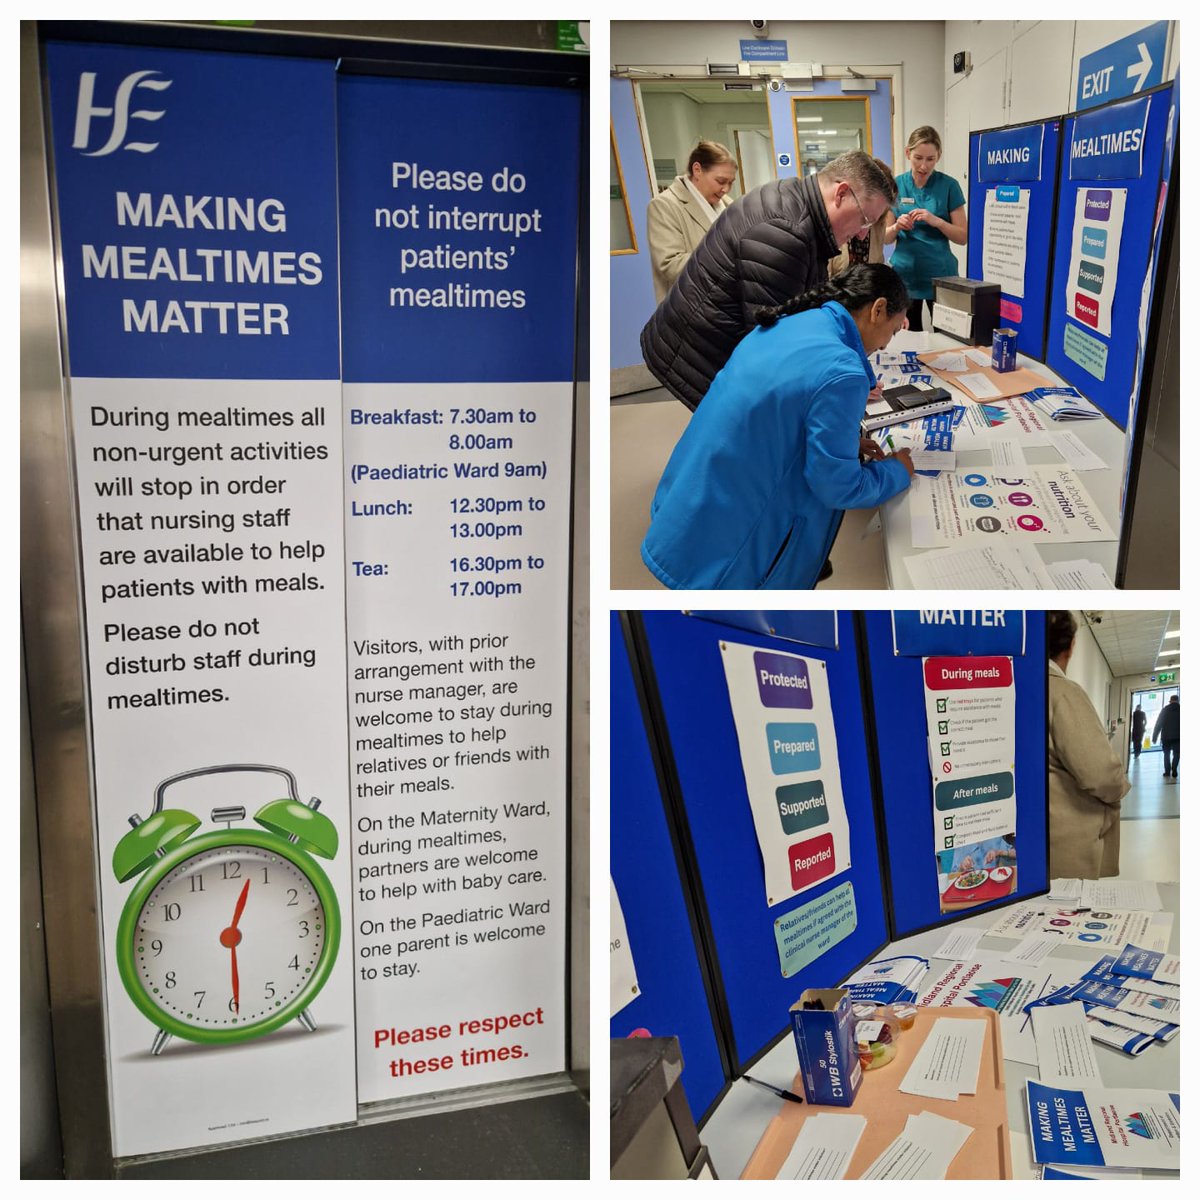 #MRHPortlaoise have today launched #MealtimesMatter to promote the operation of protected mealtime services in the Hospital. During mealtimes all non-urgent activities will stop so that hospital staff are available to assist patients with their meals #NutritionandHydrationWeek